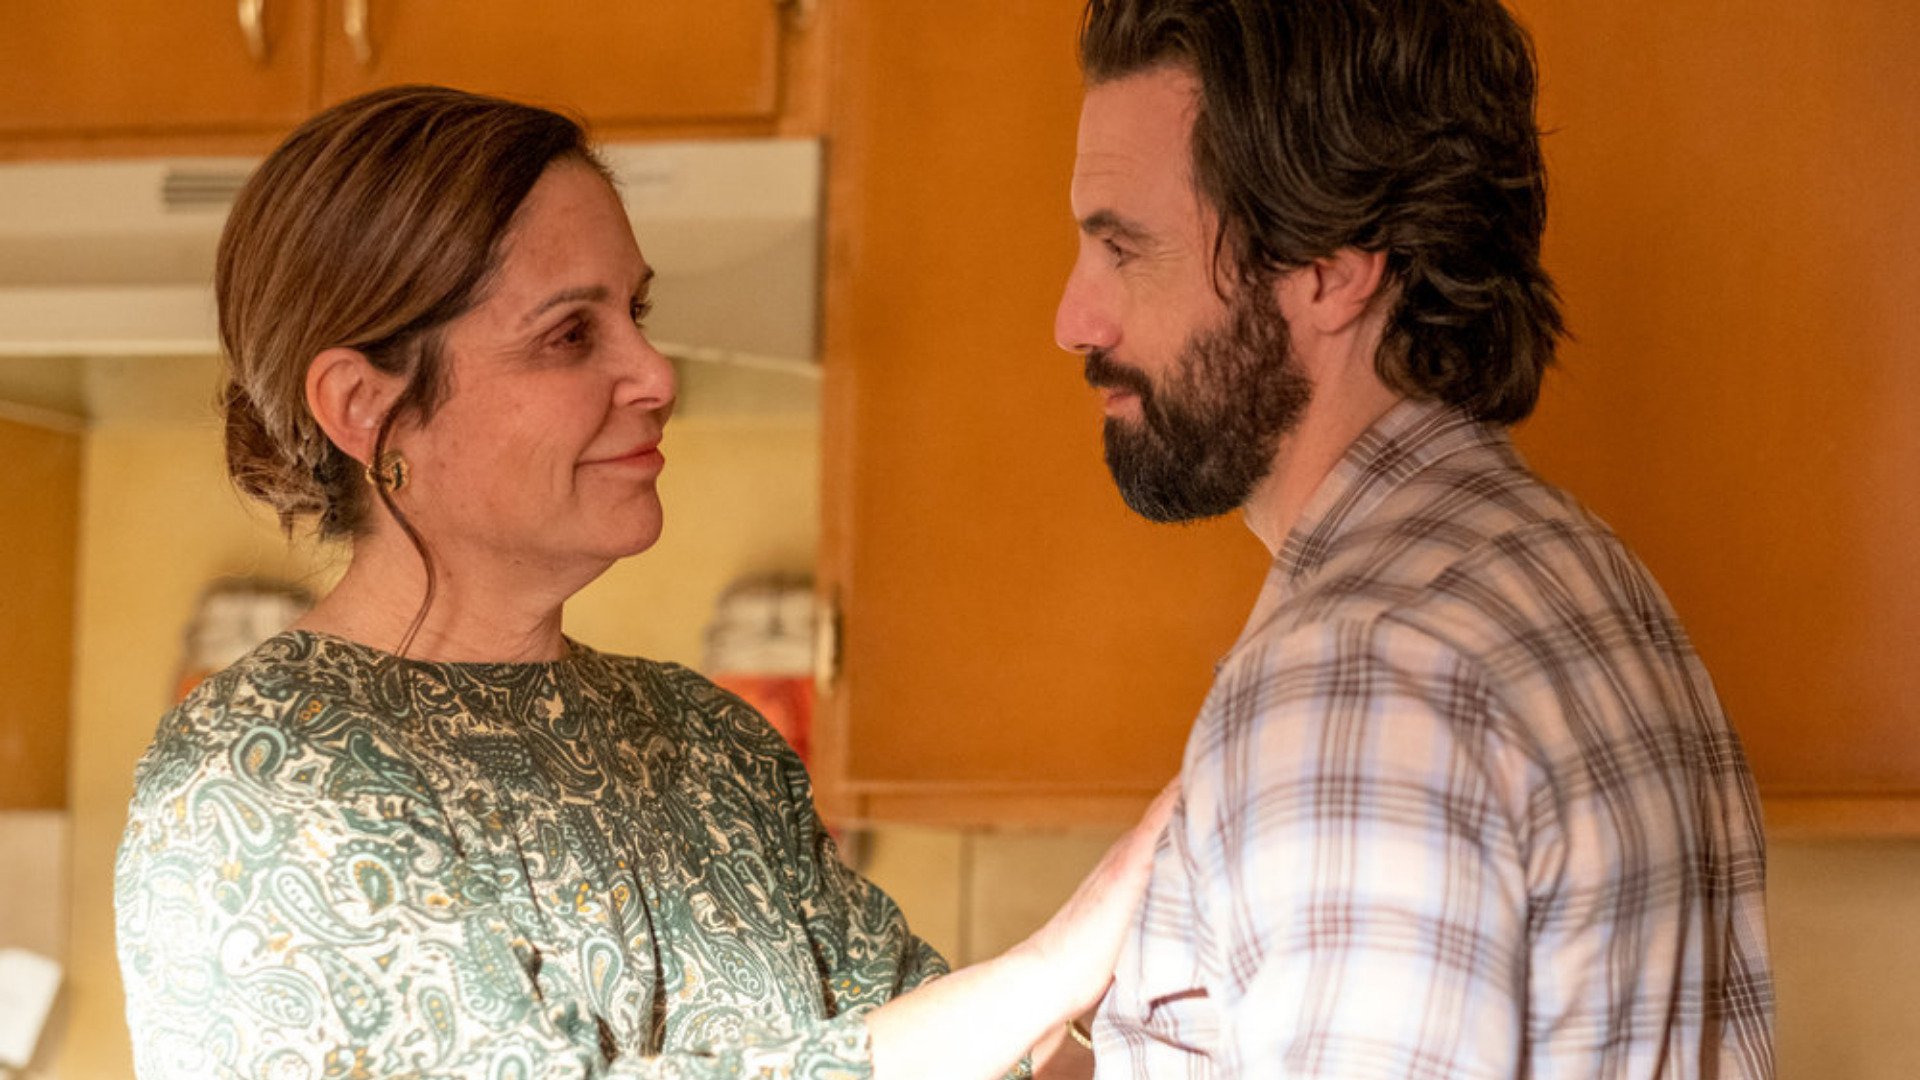 ‘This Is Us’ Season 6 Episode 4 Recap, ‘Don’t Let Me Keep You’ — Jack and Marilyn’s Story Will Remind You How Much Rebecca’s Ending Will Hurt